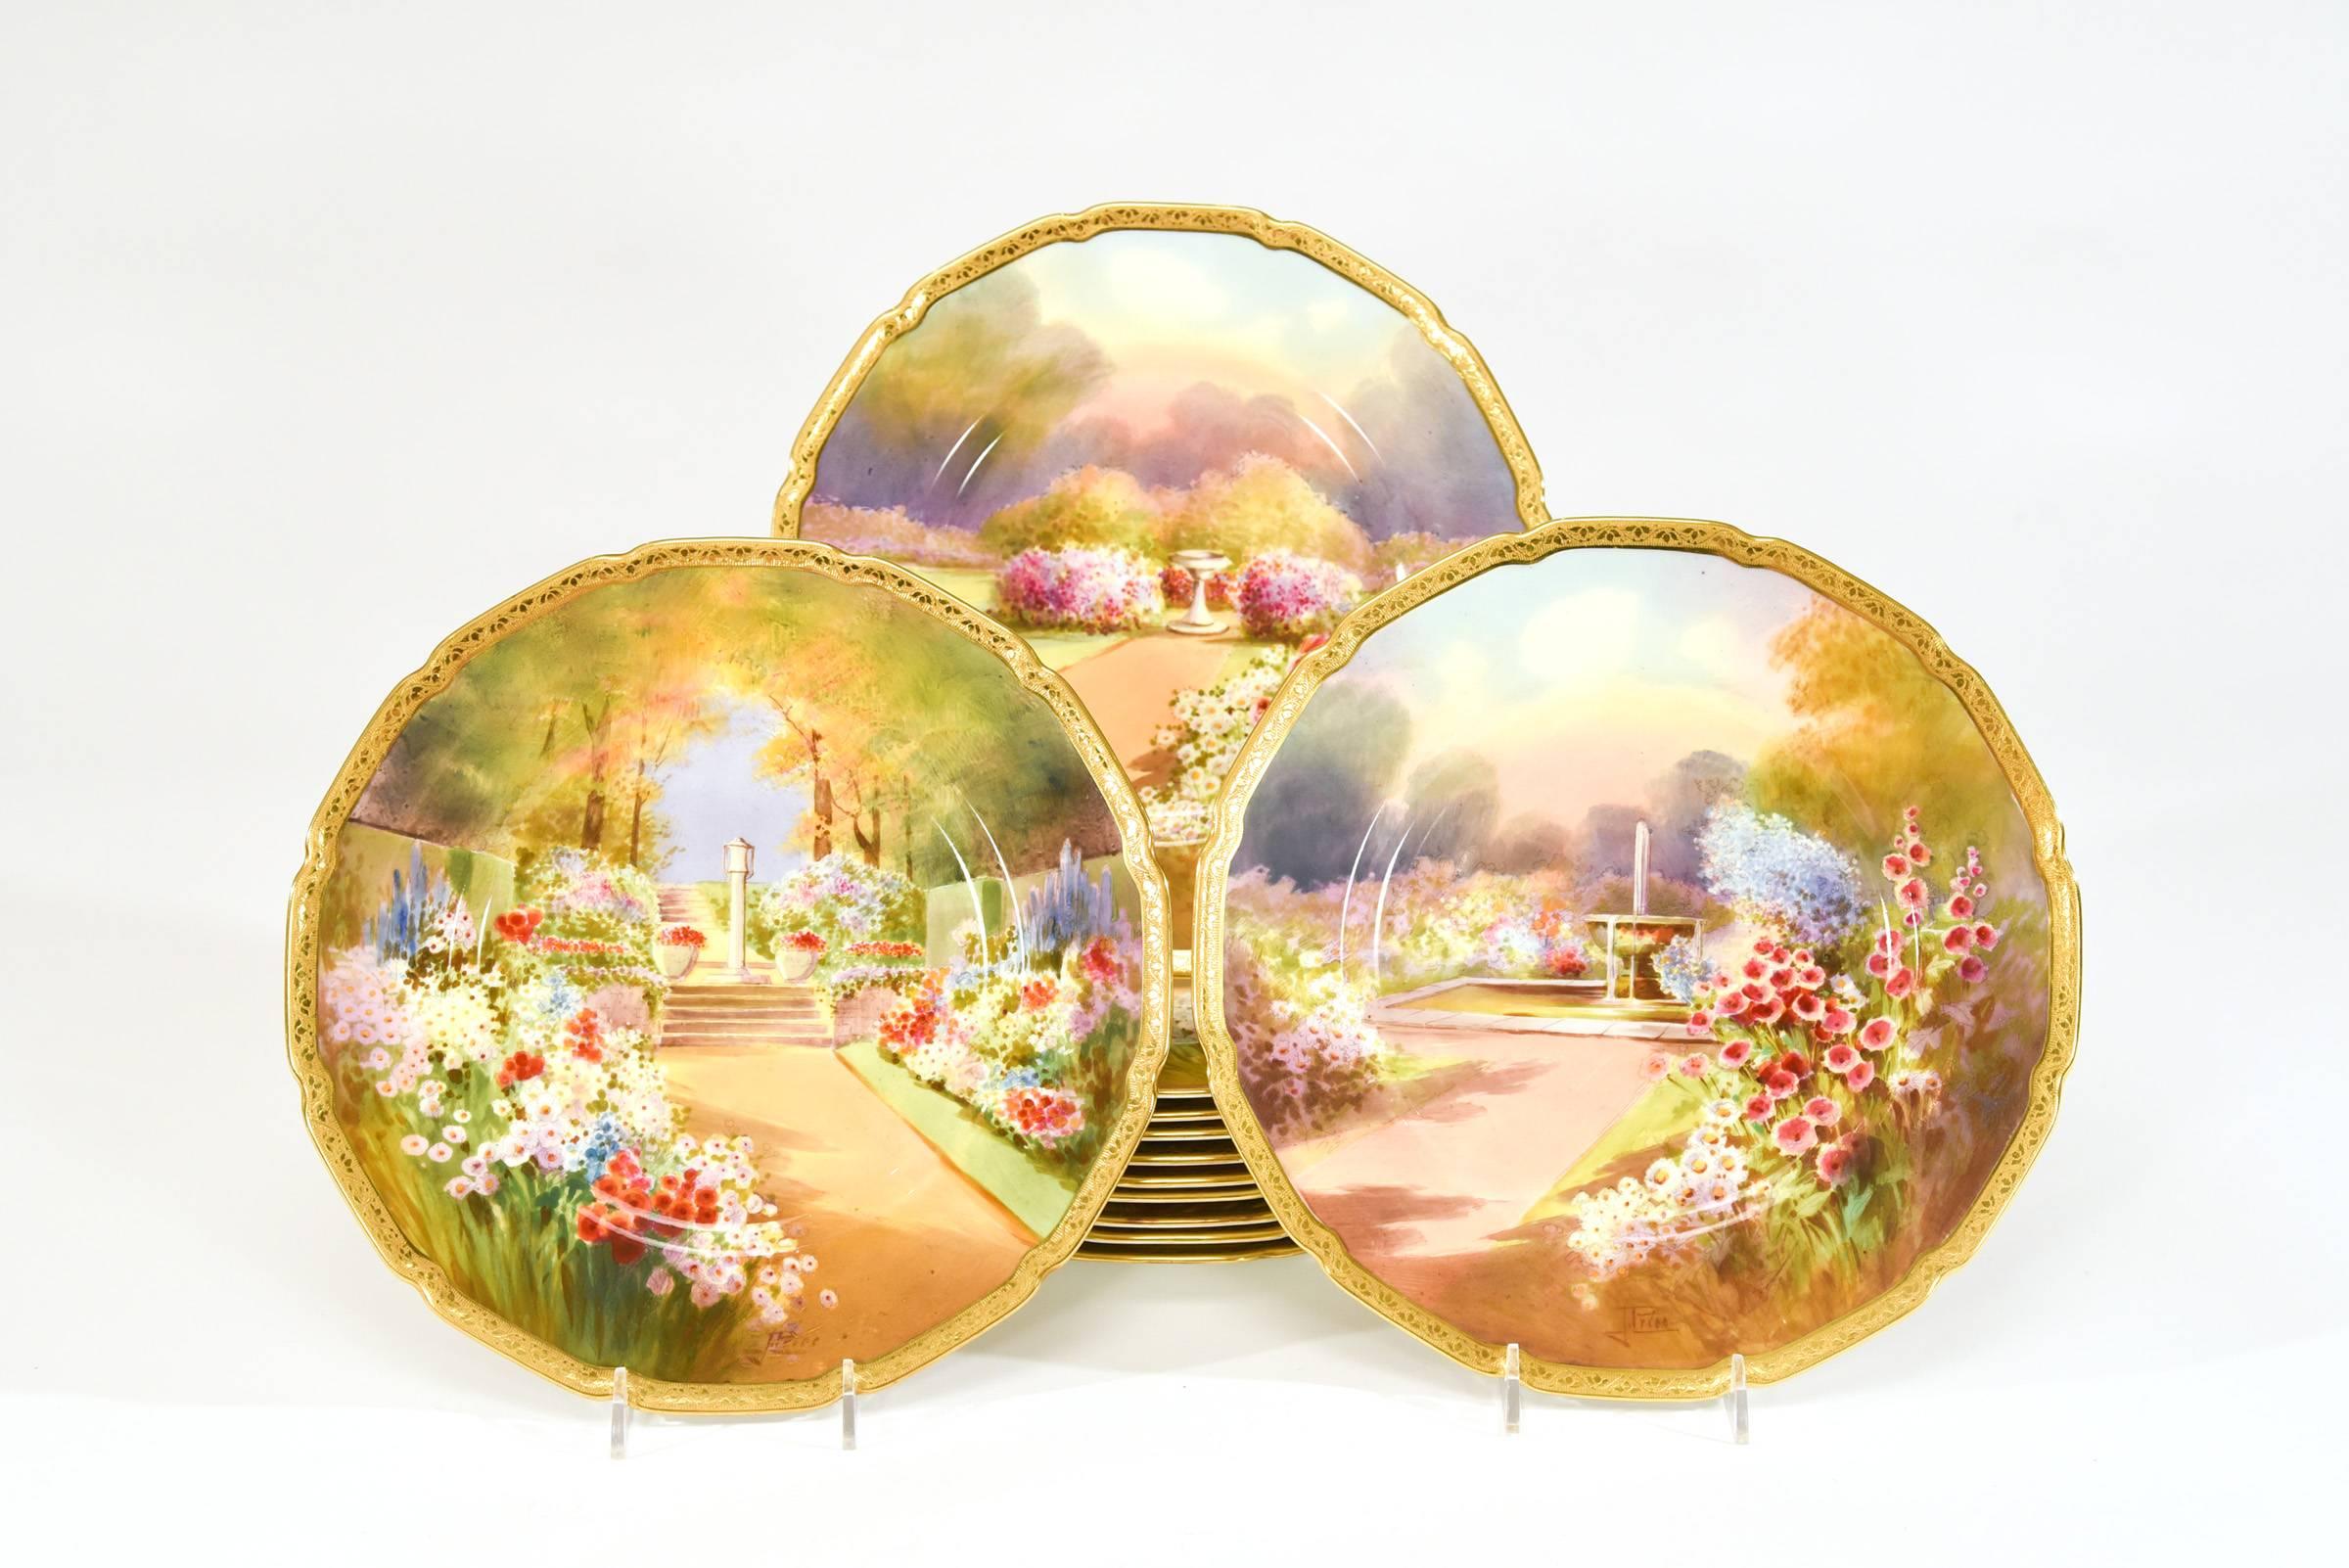 This set of 12 Royal Doulton dinner or cabinet plates is hand-painted with landscape and garden scenes in a bright vibrant palette. Each unique plate has the garden (Dingley Park, Draketown, The Moated Grange, Ammerdown, etc.) named on the reverse